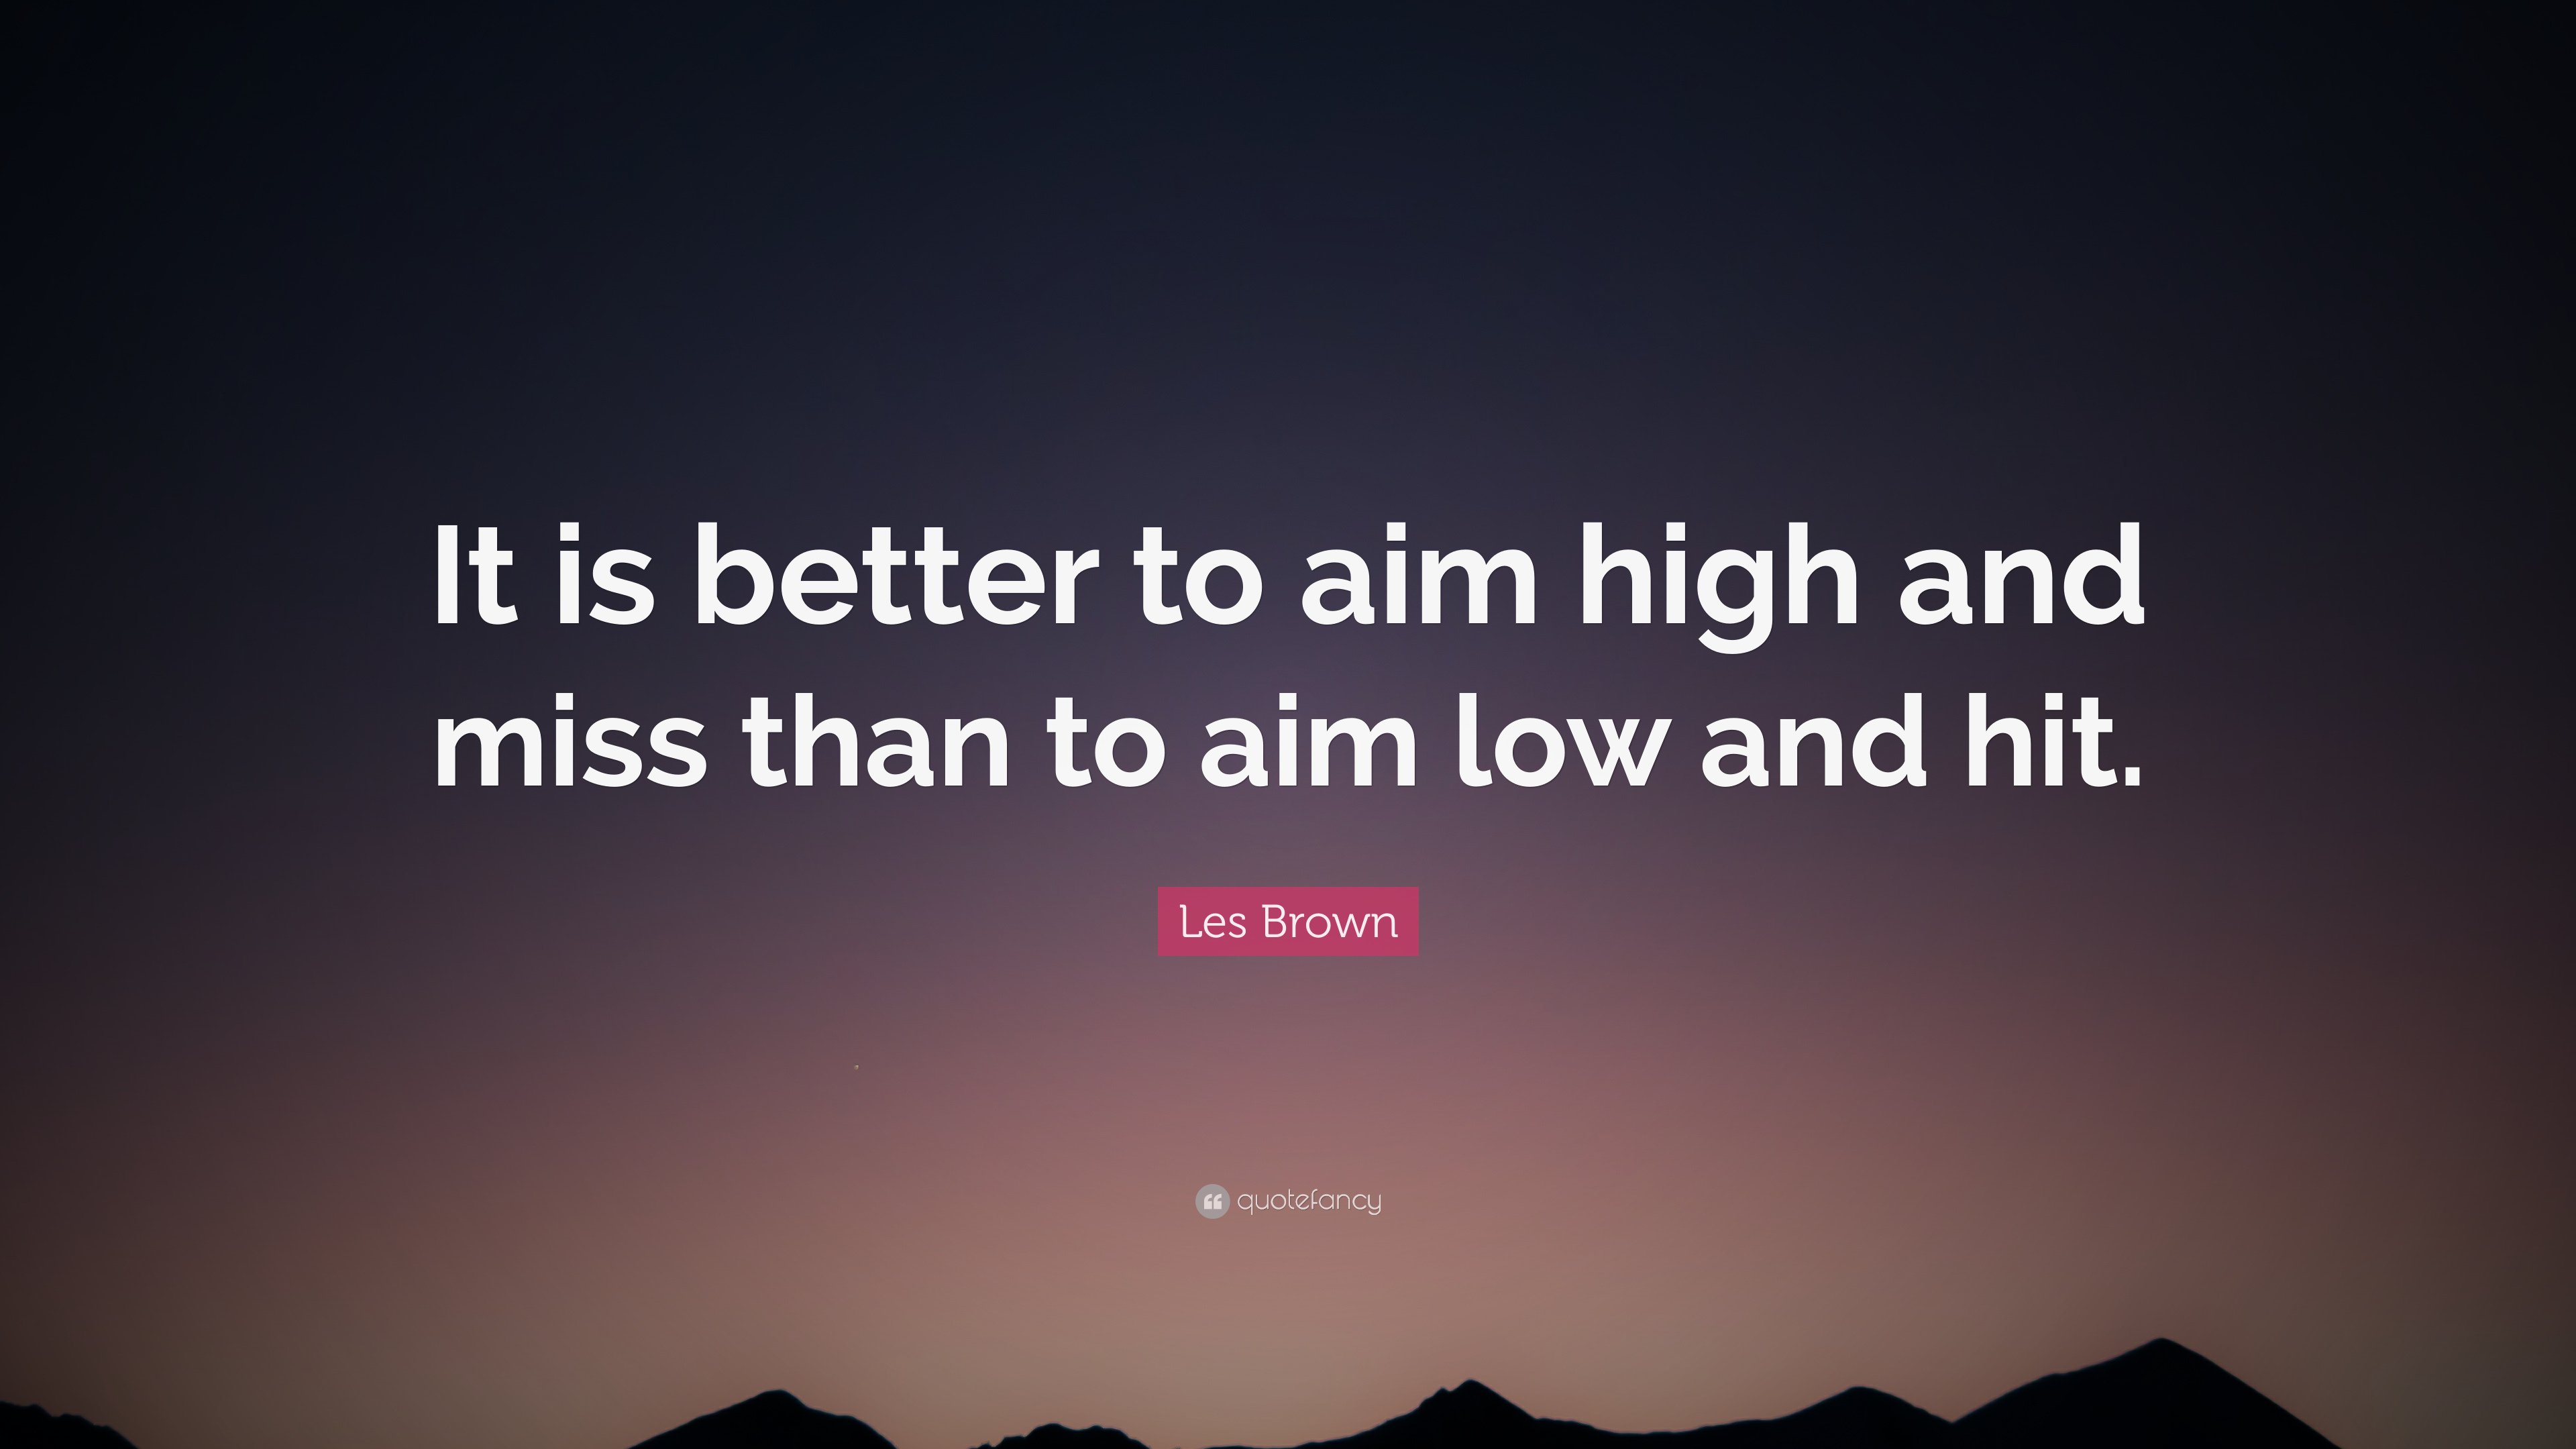 Les Brown Quote: “It is better to aim high and miss than to aim low and